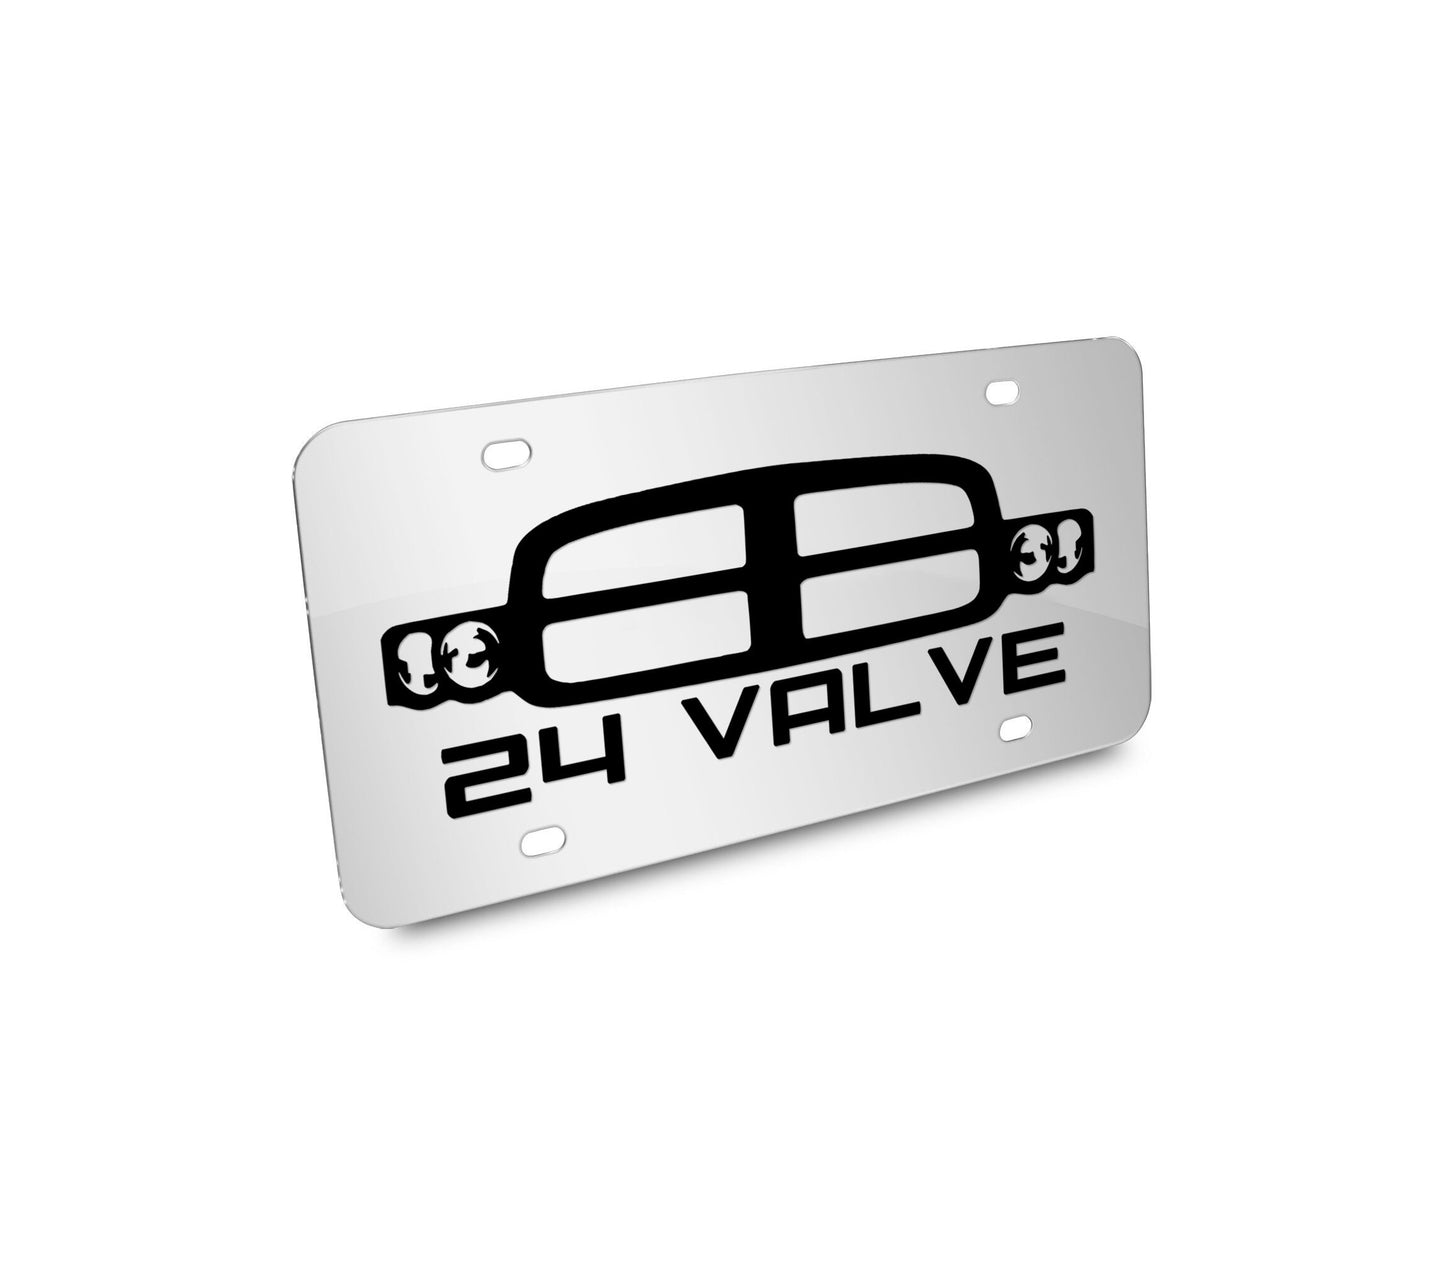 24 Valve 3rd Gen Grille License Plate - Many Colors